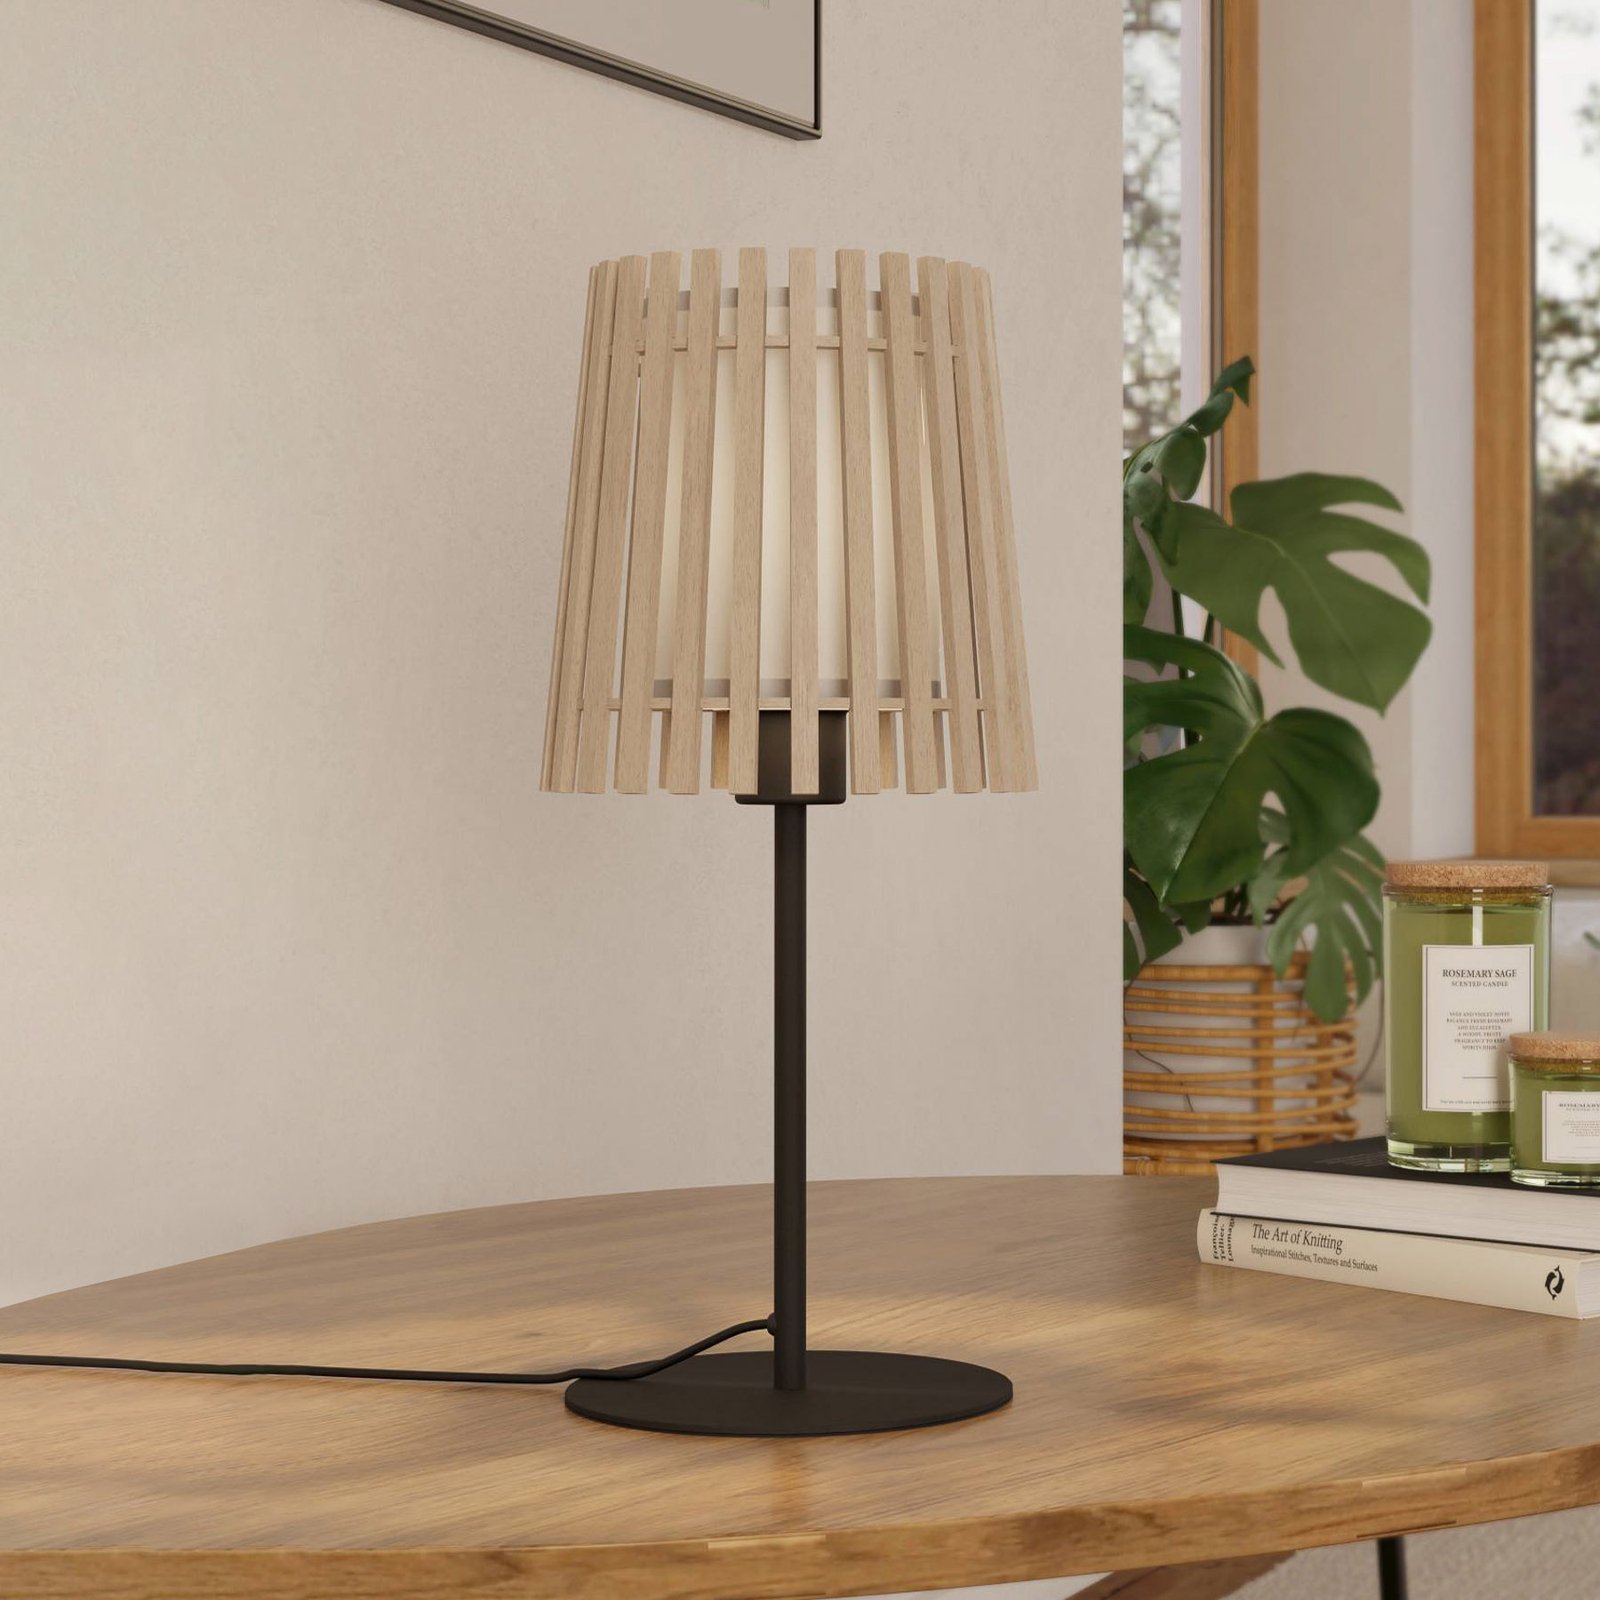 Fattoria table lamp with a double lampshade